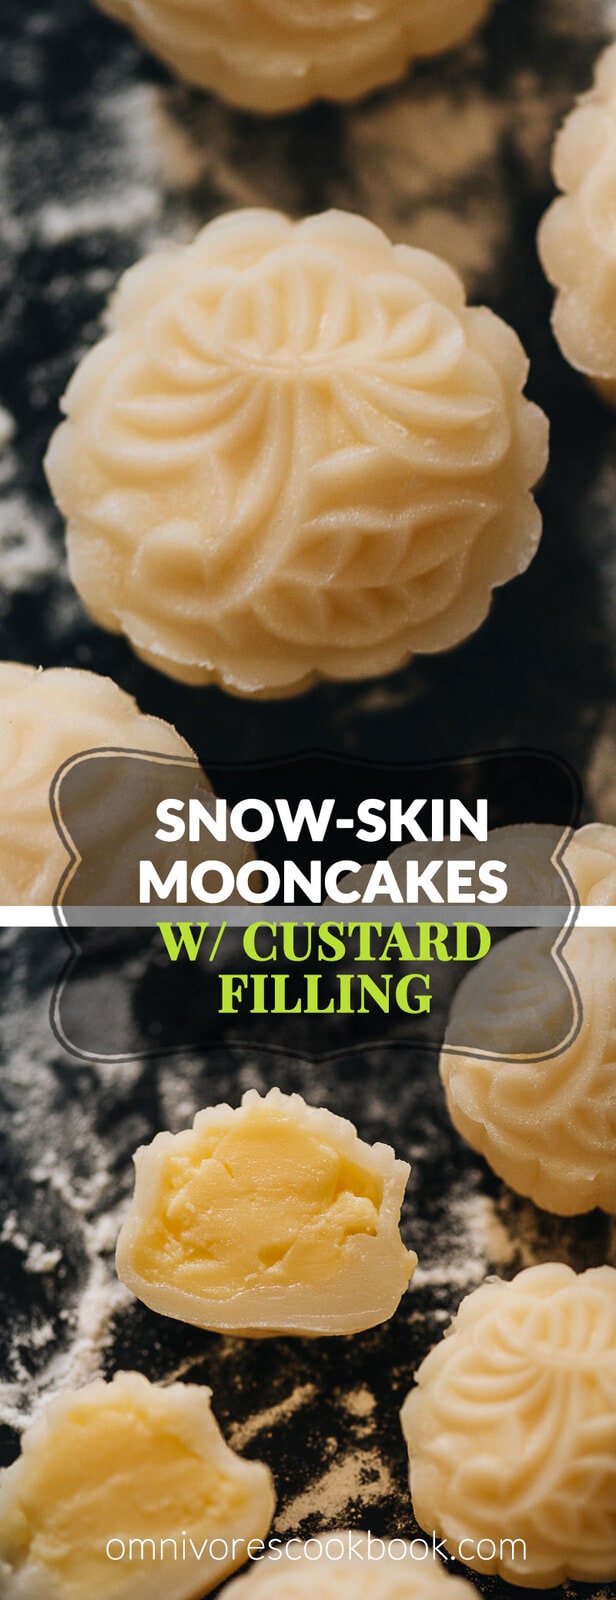 Snow Skin Mooncake with Custard Filling - The snow skin mooncake is made with a tender and fragrant mochi wrapper and a creamy custard filling. This recipe does not require special ingredients that are hard to find and you can get everything online if you don’t live close to an Asian market. It’s the perfect recipe to celebrate the Mid-Autumn Festival.